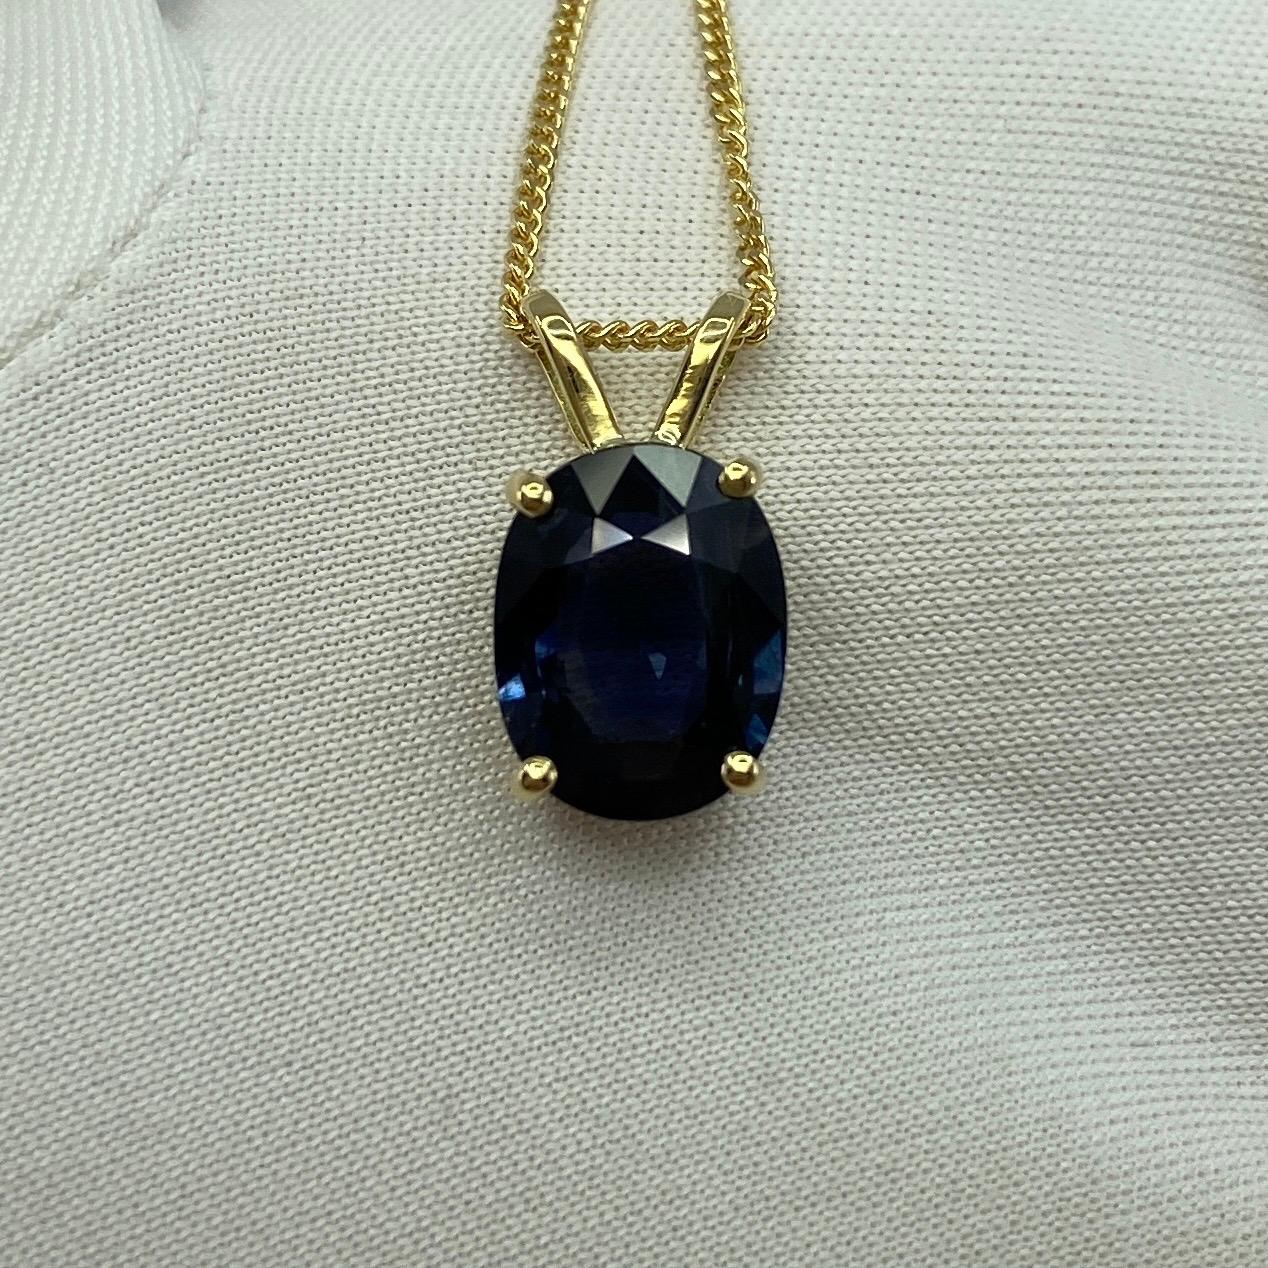 GIA Certified 2.51ct Untreated Deep Blue Sapphire Oval 18k Yellow Gold Pendant 8